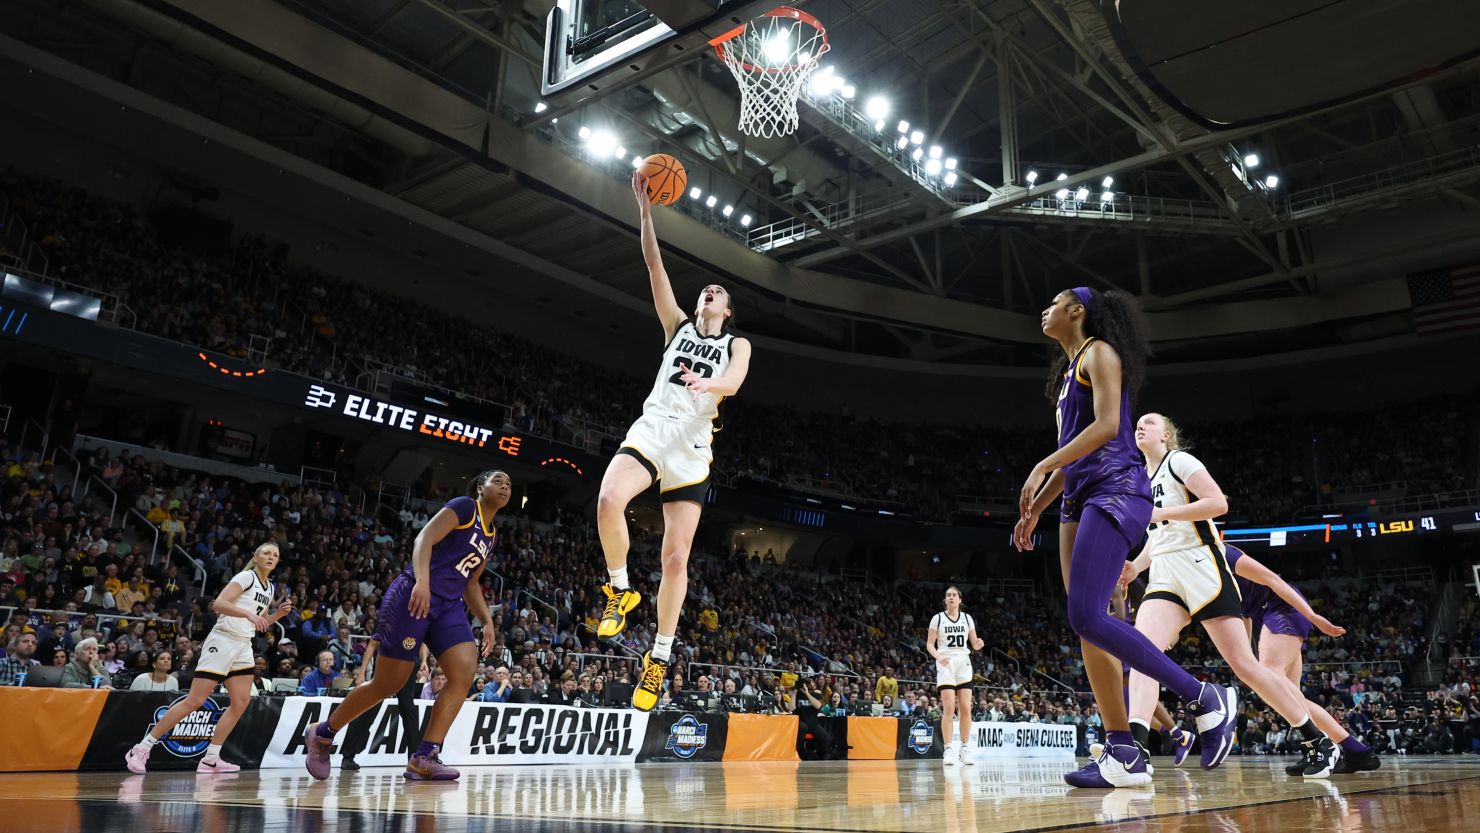 Caitlin Clark, #22 of the Iowa Hawkeyes, jumps for a basket during the first half against the LSU Tigers during the Elite Eight round of the 2024 NCAA Women's Basketball Tournament held at MVP Arena on Monday in Albany, New York.